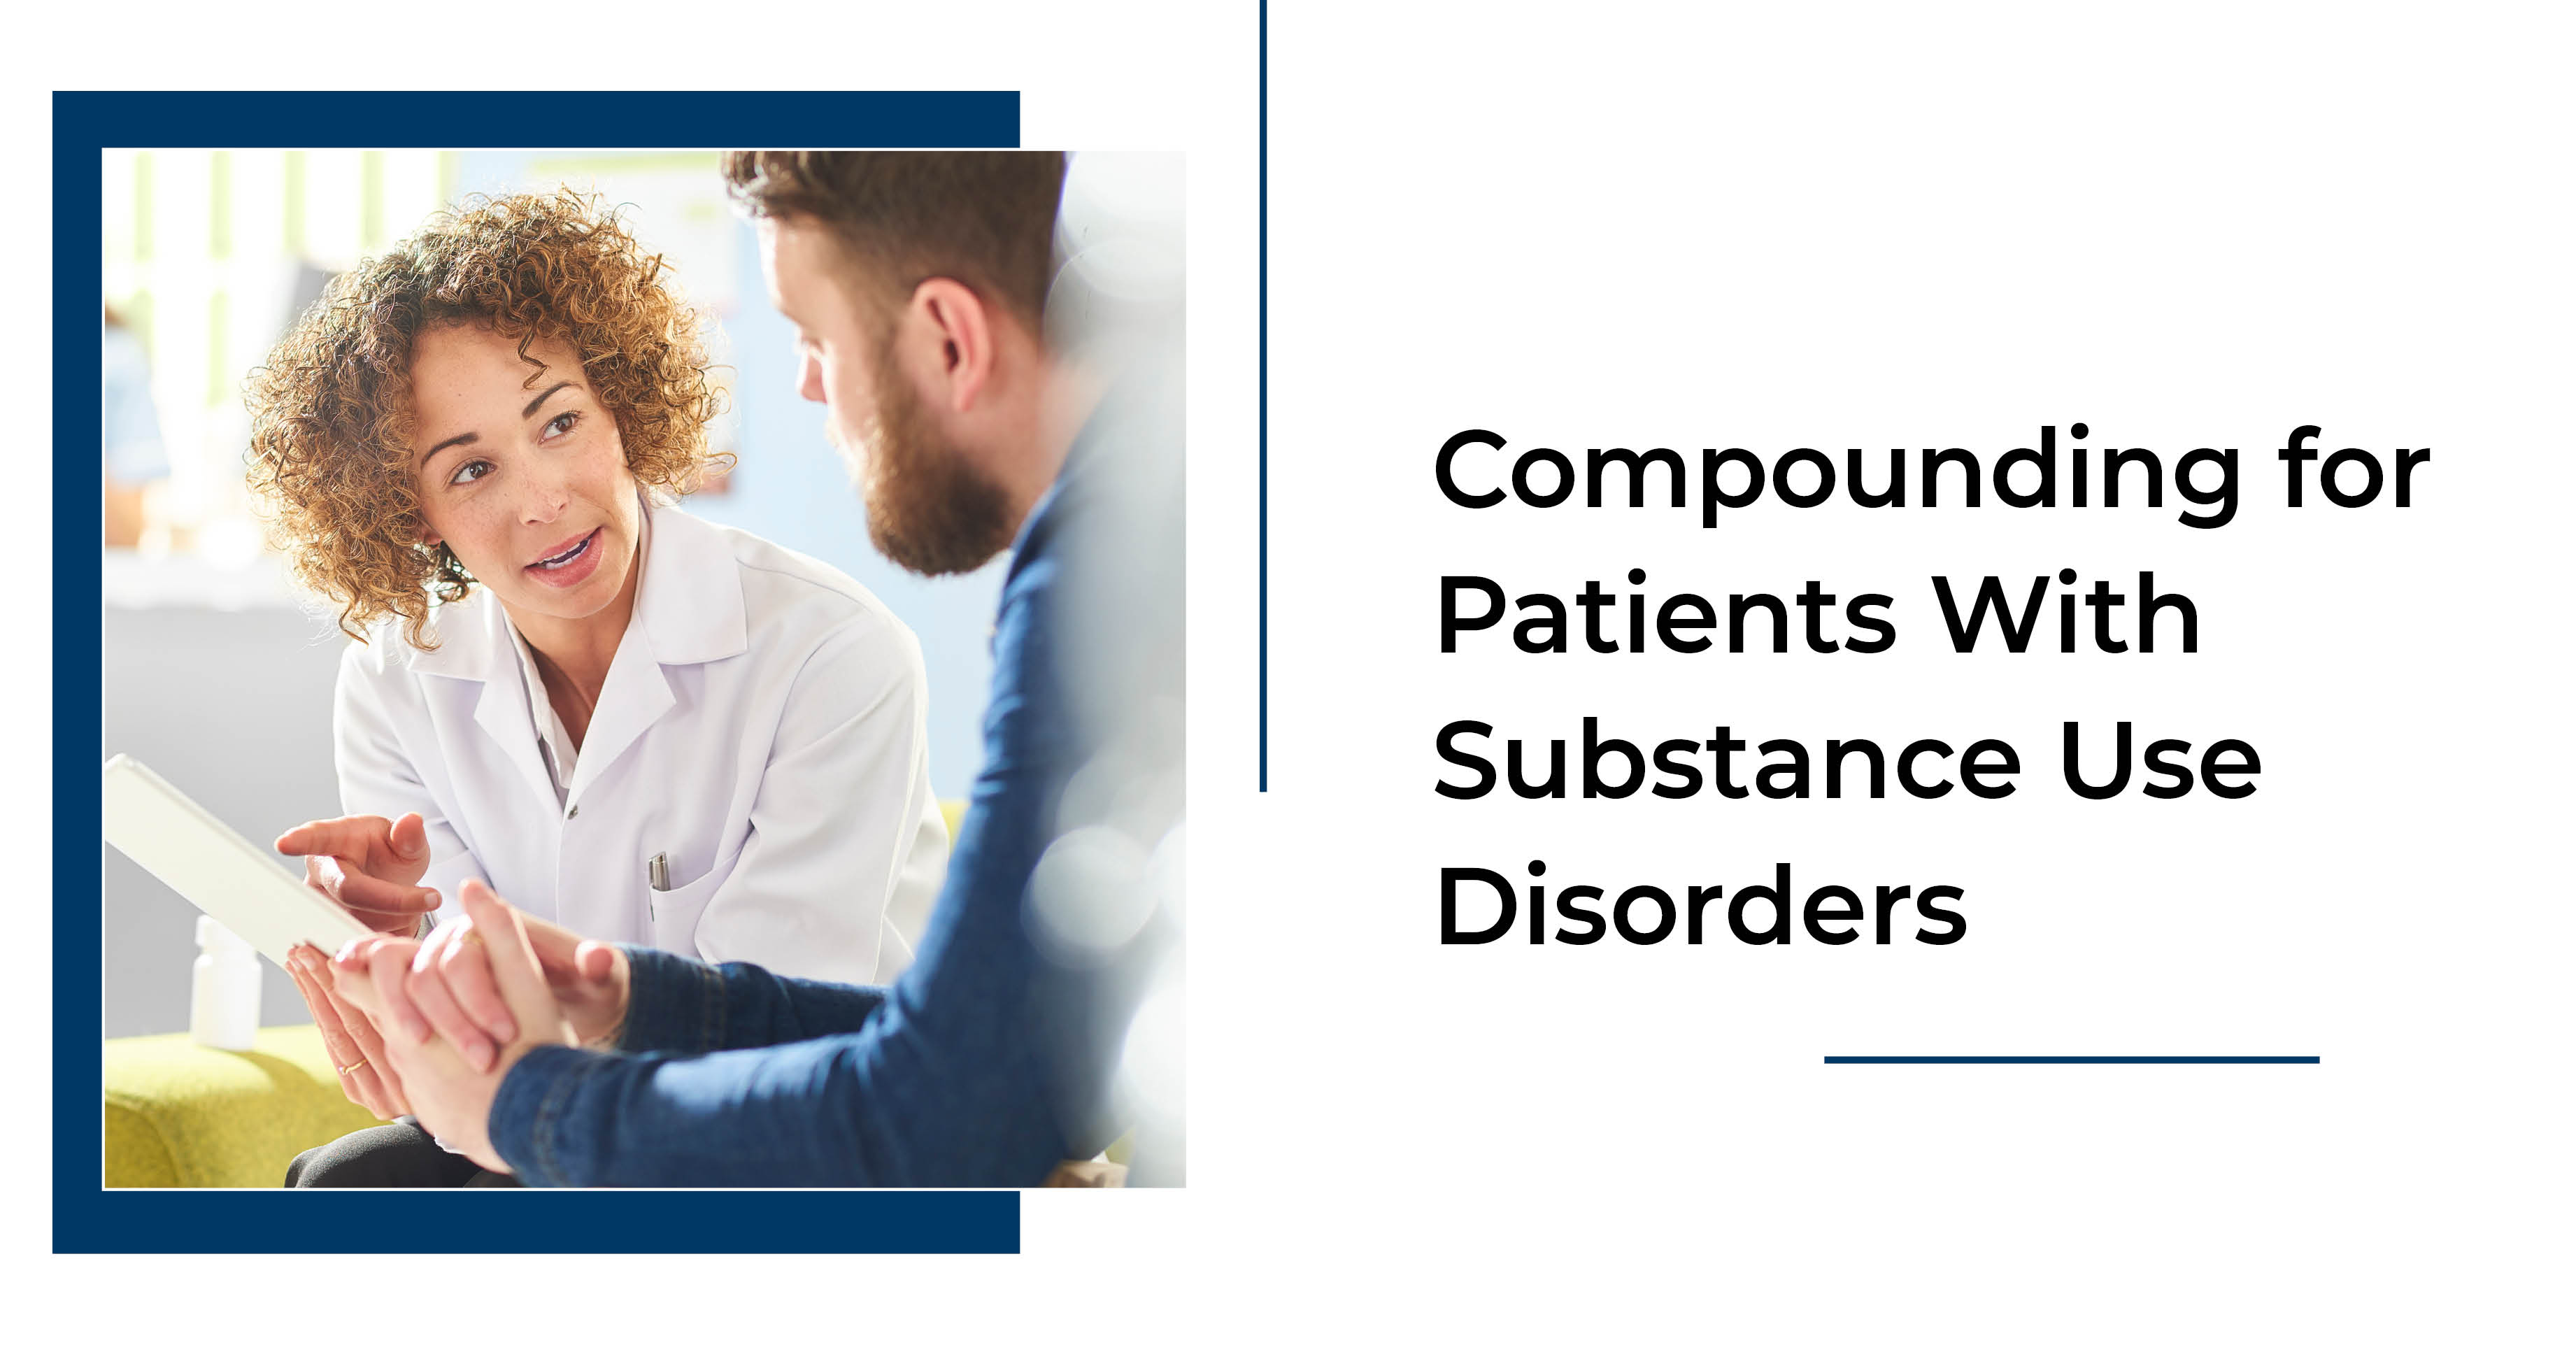 Compounding_for_Patients_With_Substance_Use_Disorders.jpg